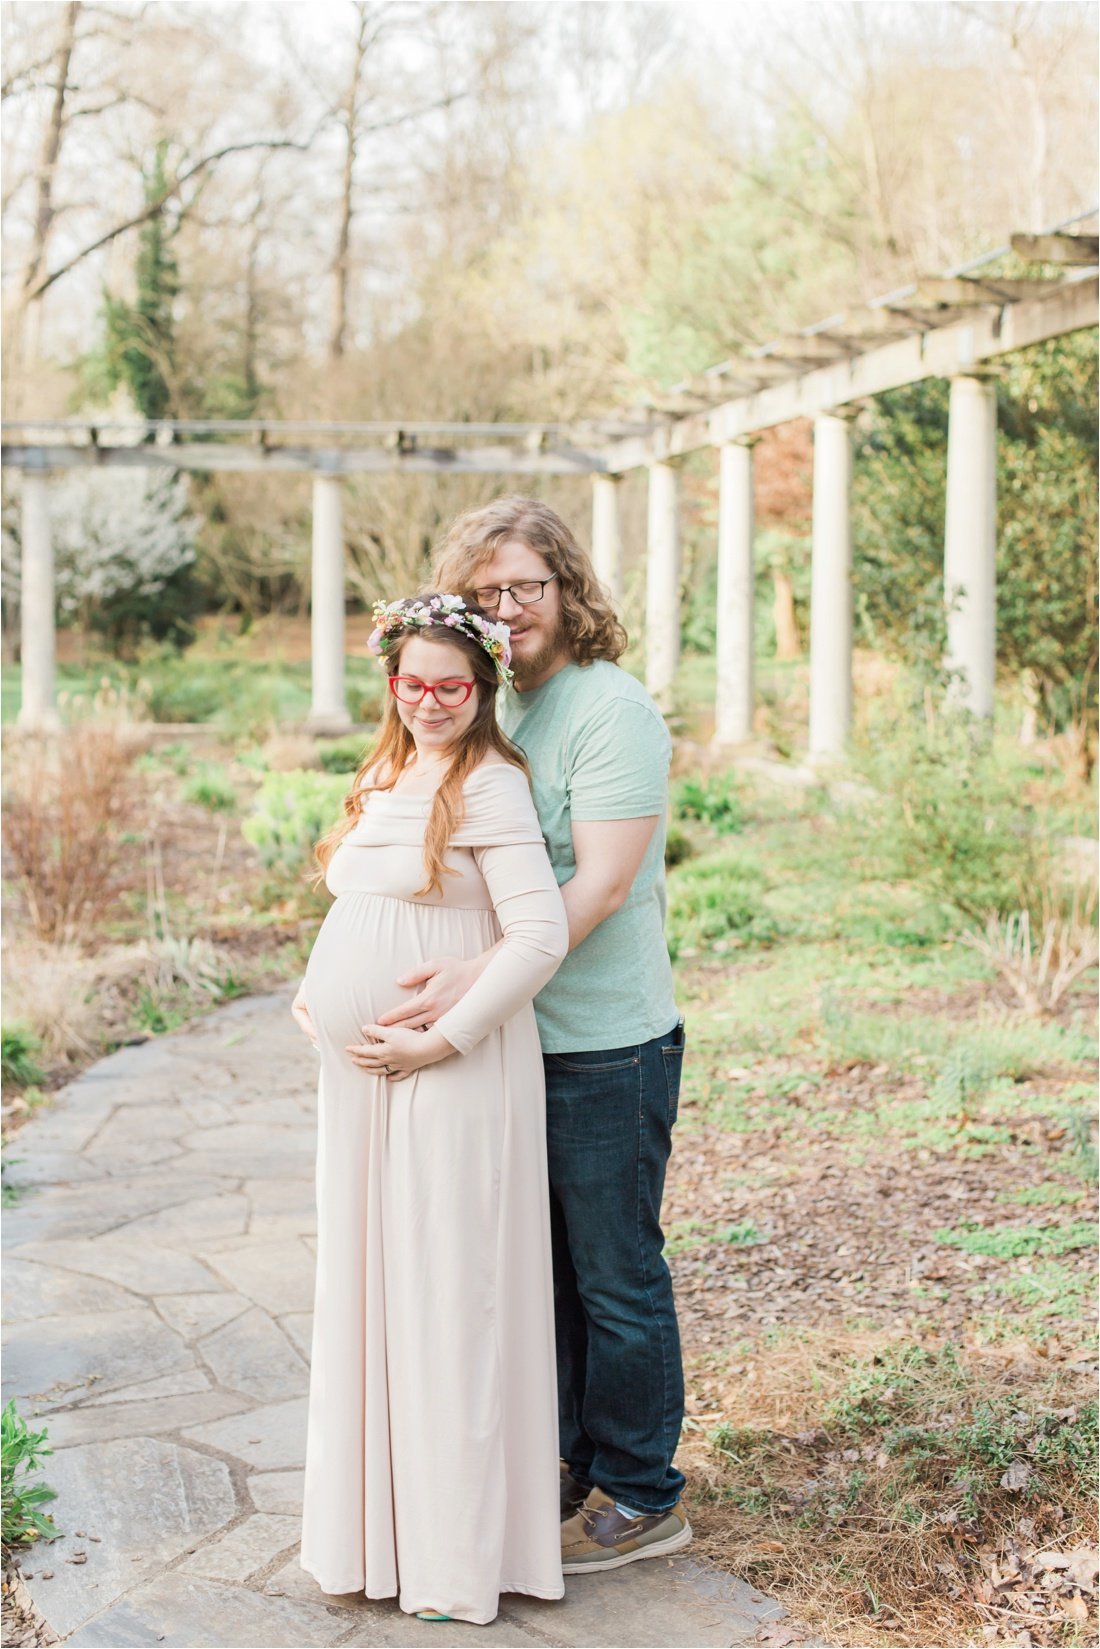 Cator-Woolford-Gardens-Maternity-Photography_0007